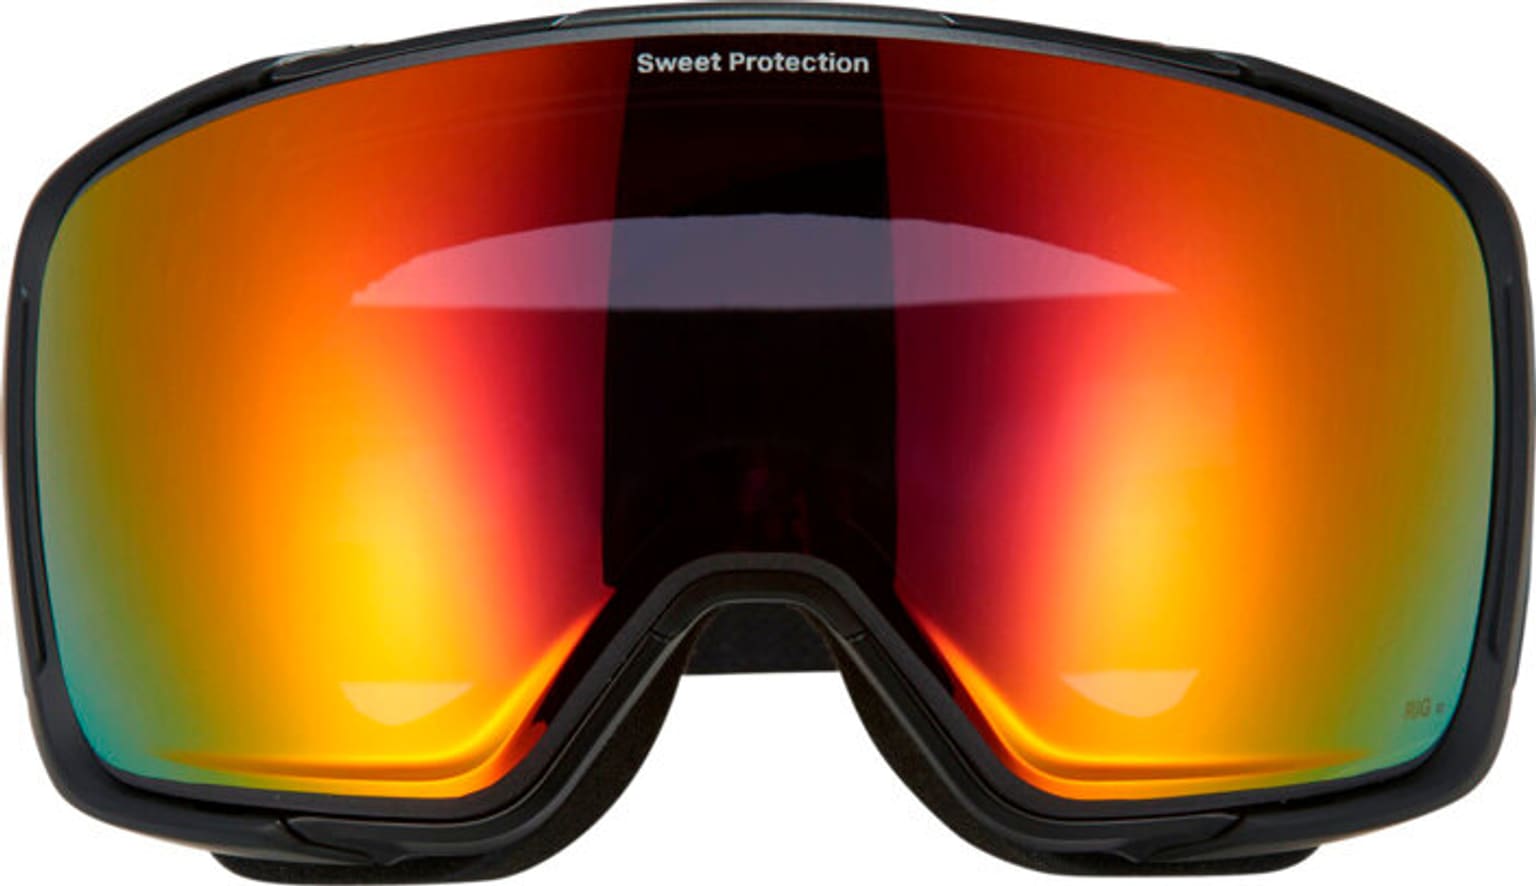 Sweet Protection Sweet Protection Interstellar RIG Reflect with Extra Lens Skibrille nero 2